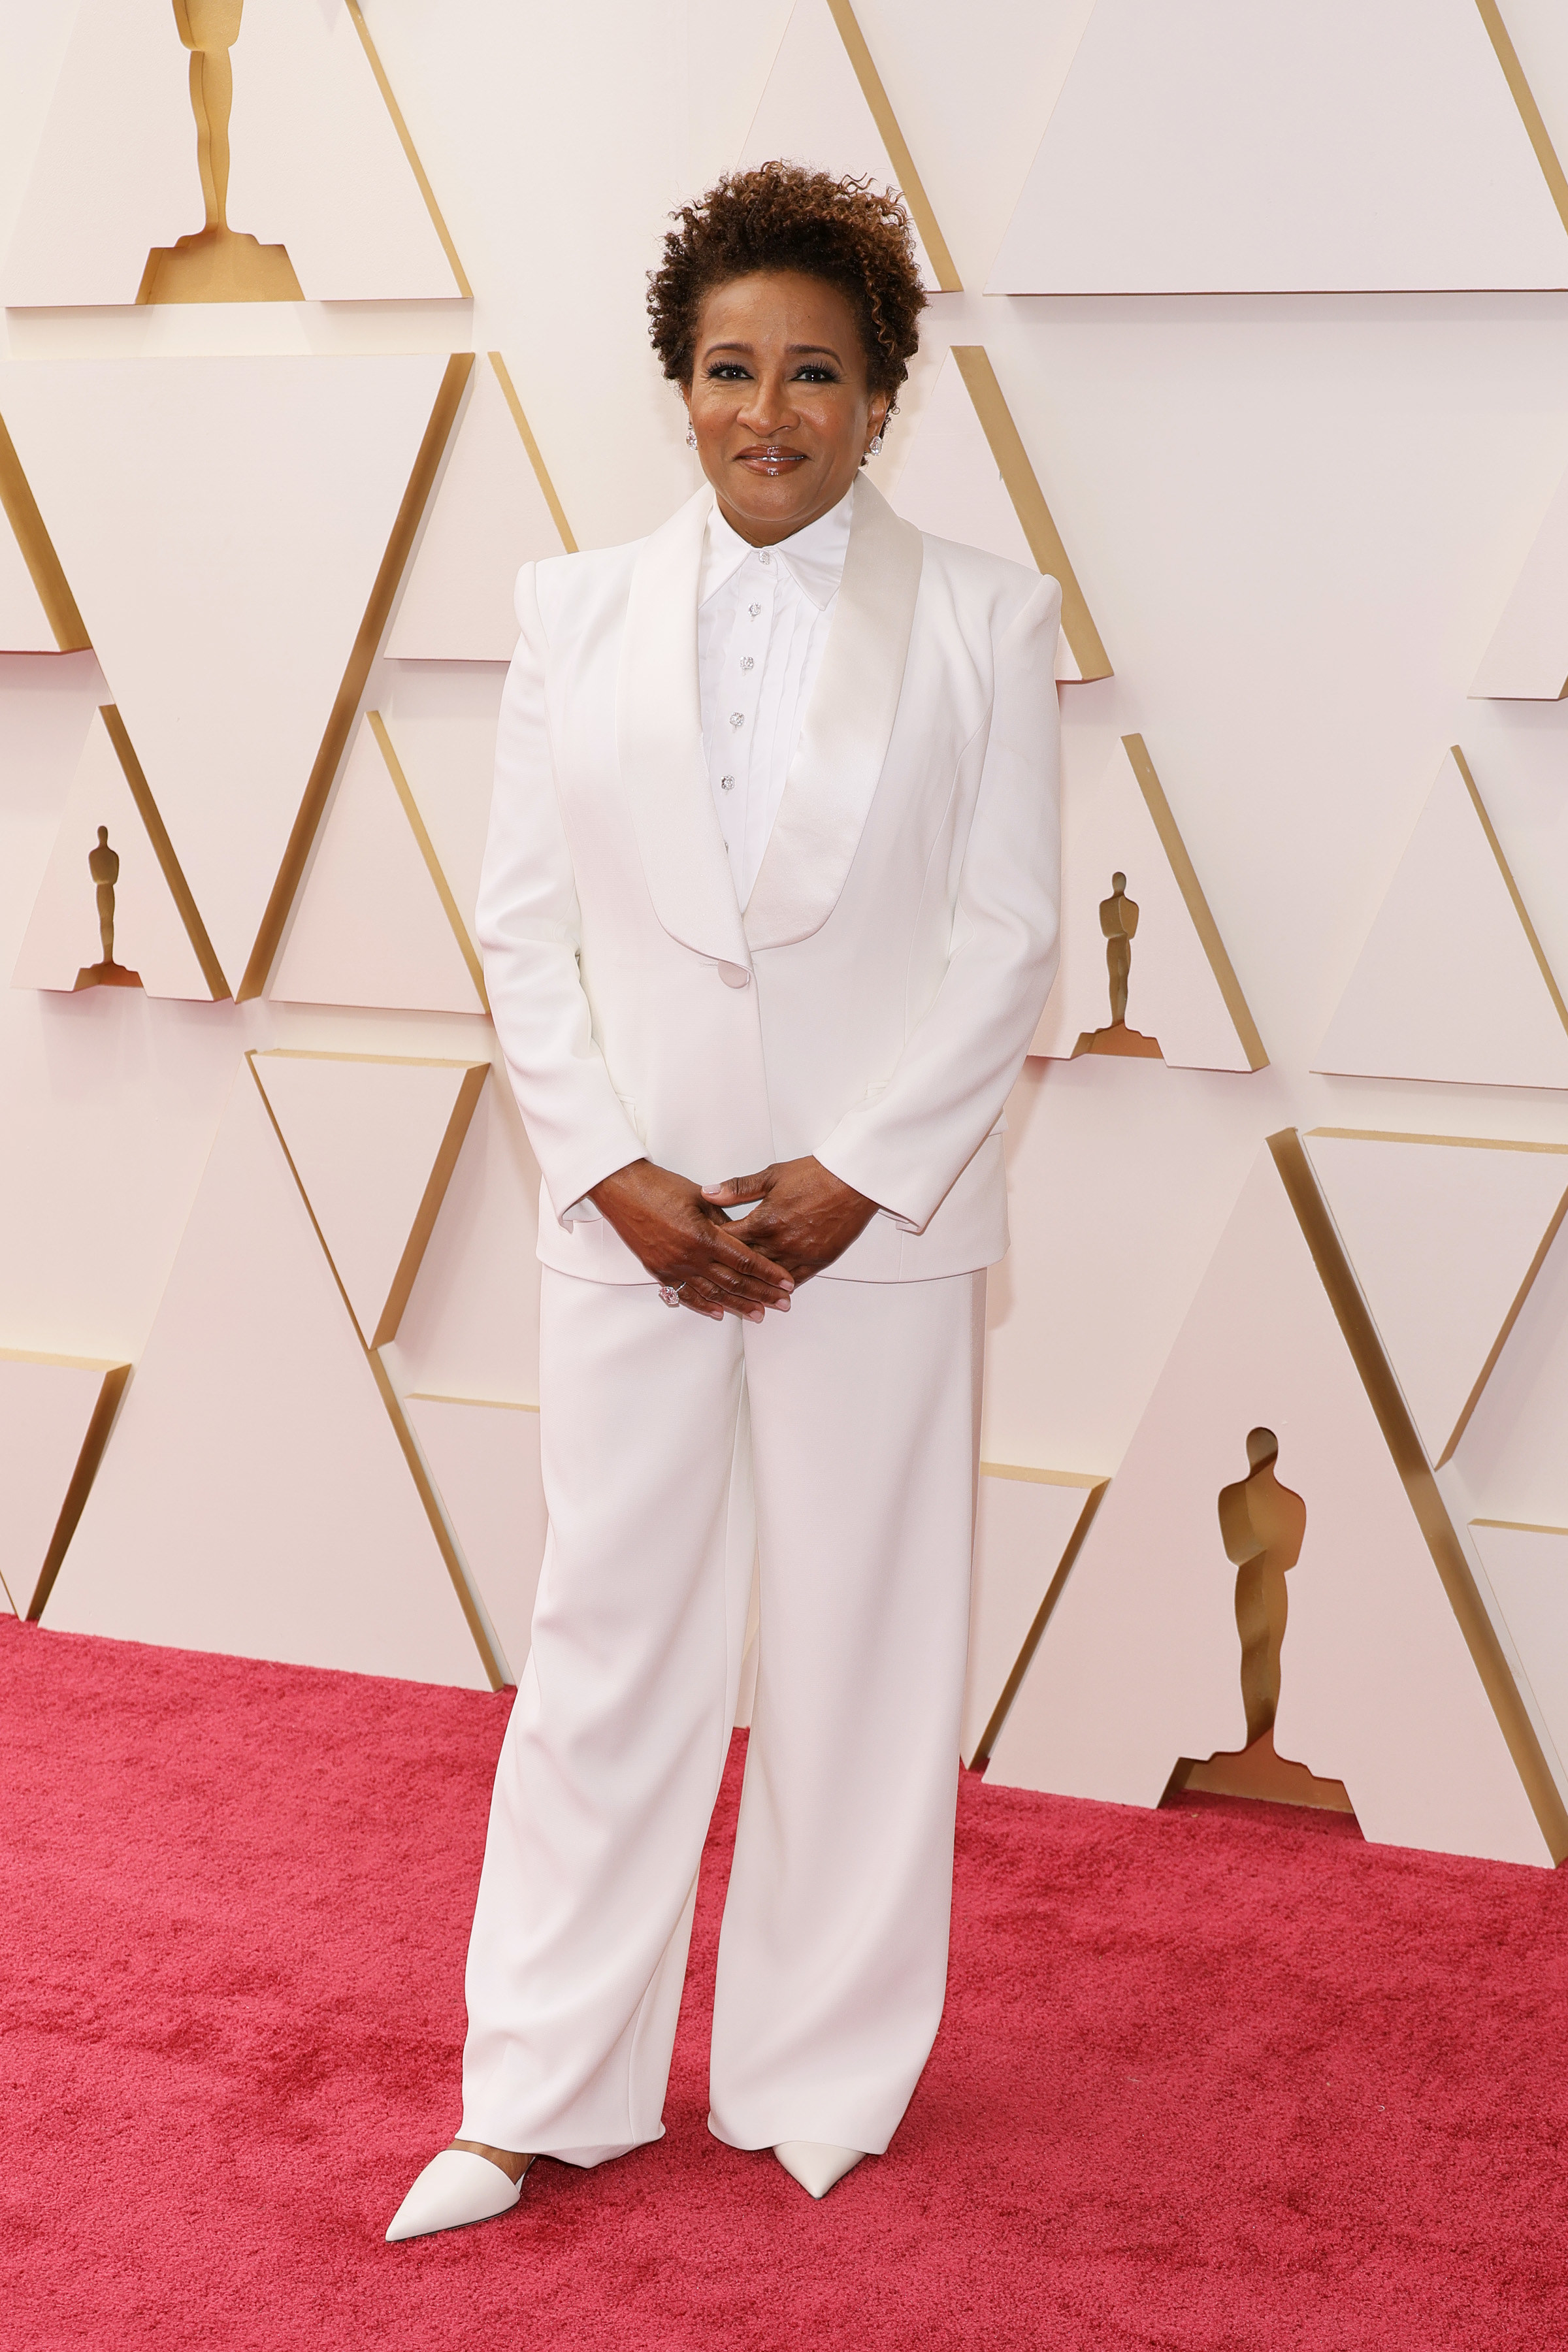 Wanda posing on the red carpet in a wide-legged pantsuit and matching heels